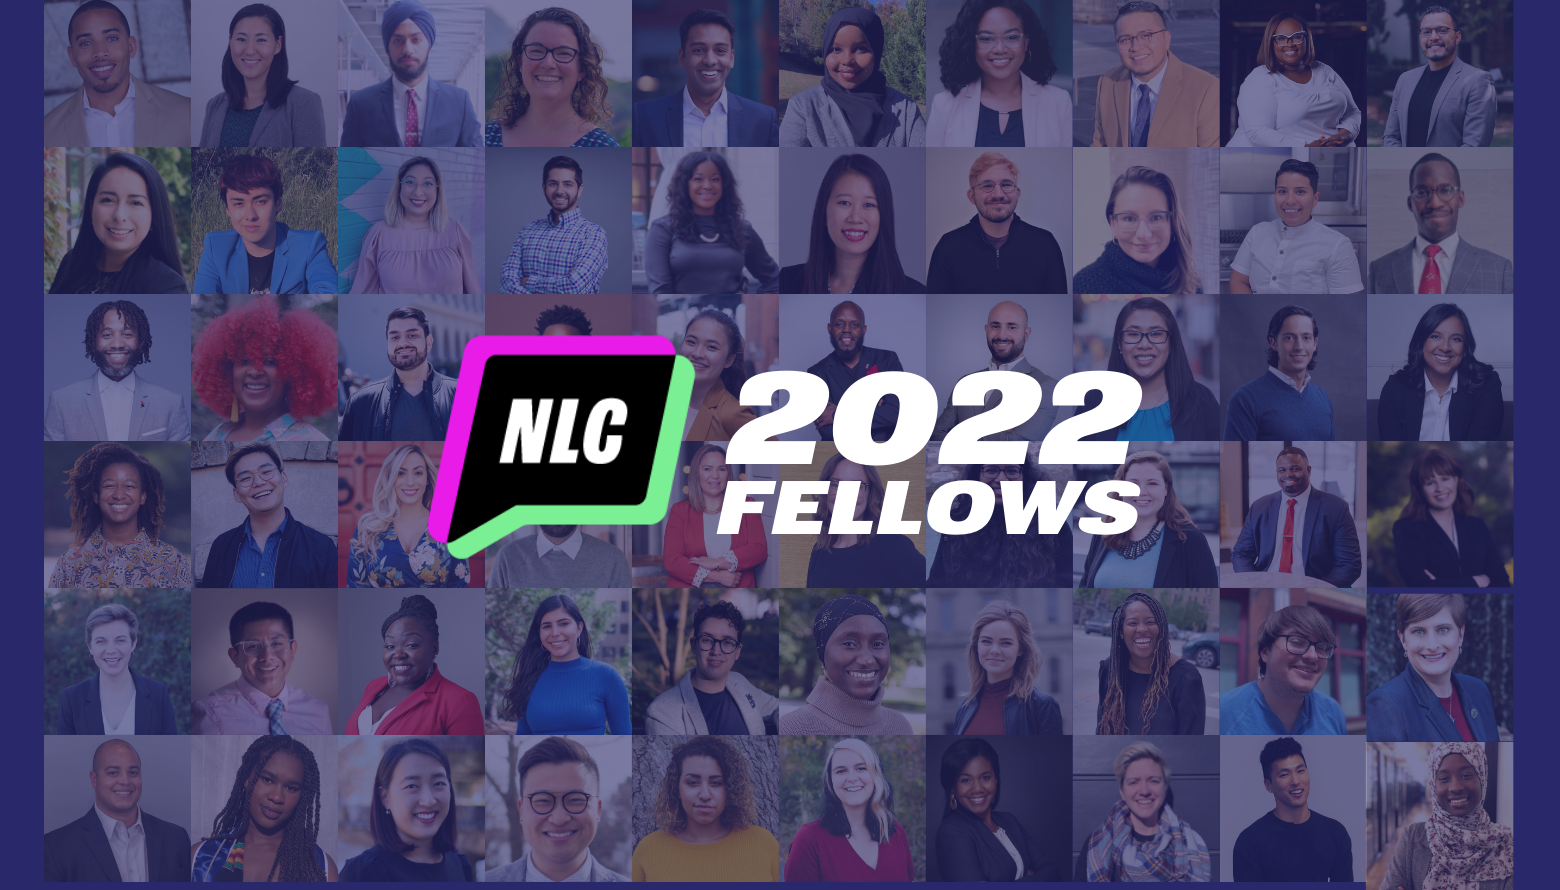 NLC Nearly 700 New Fellows New Leaders Council